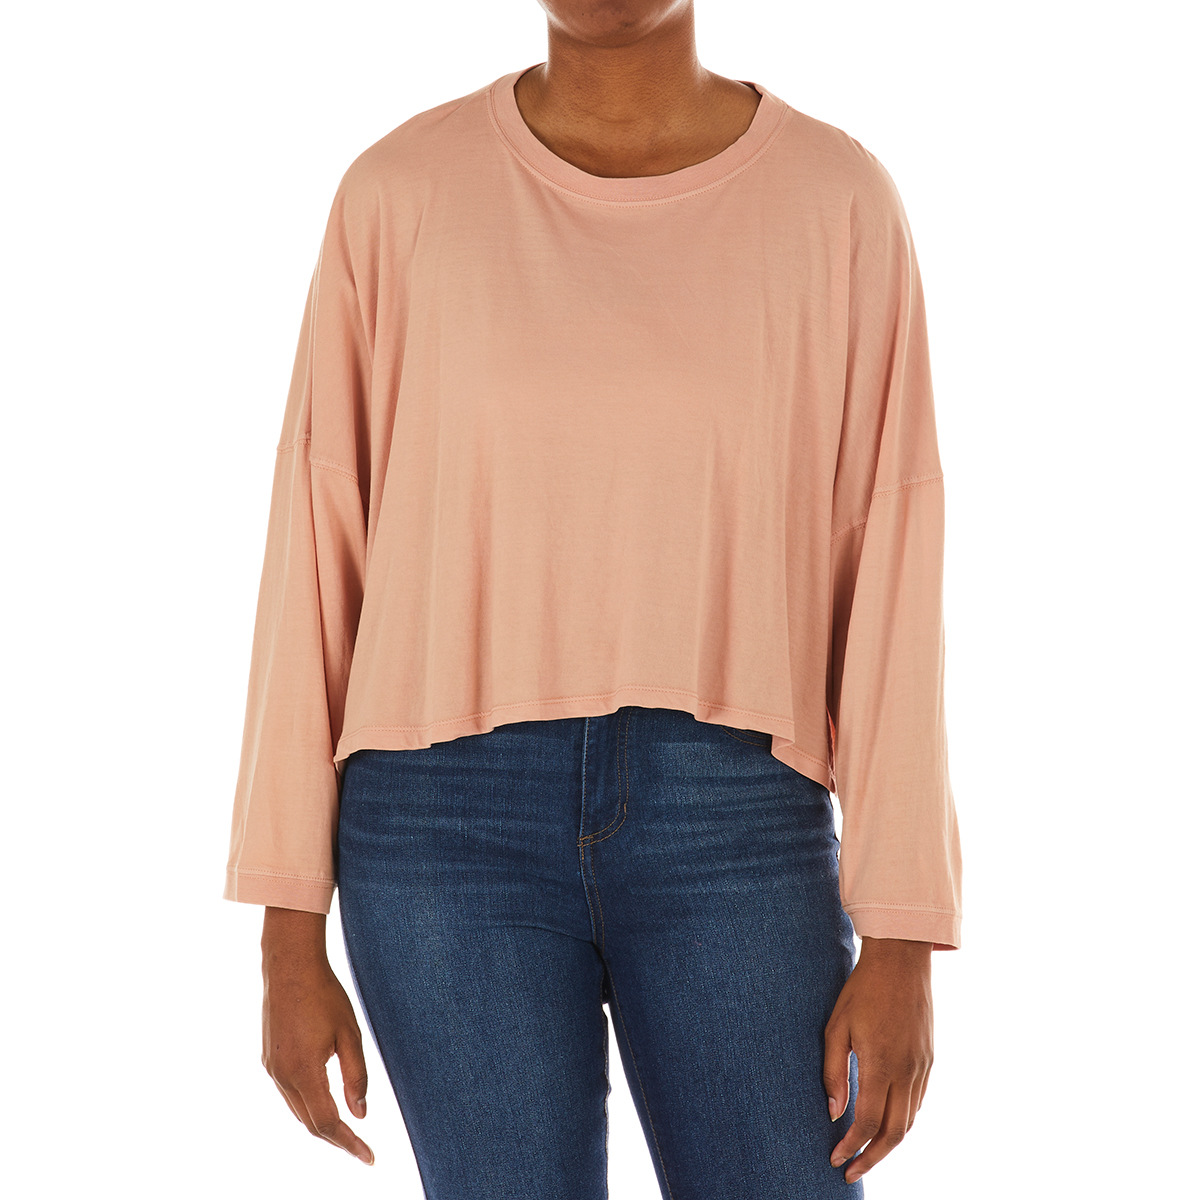 Angie Juniors' Oversized Cropped Long-Sleeve Tee